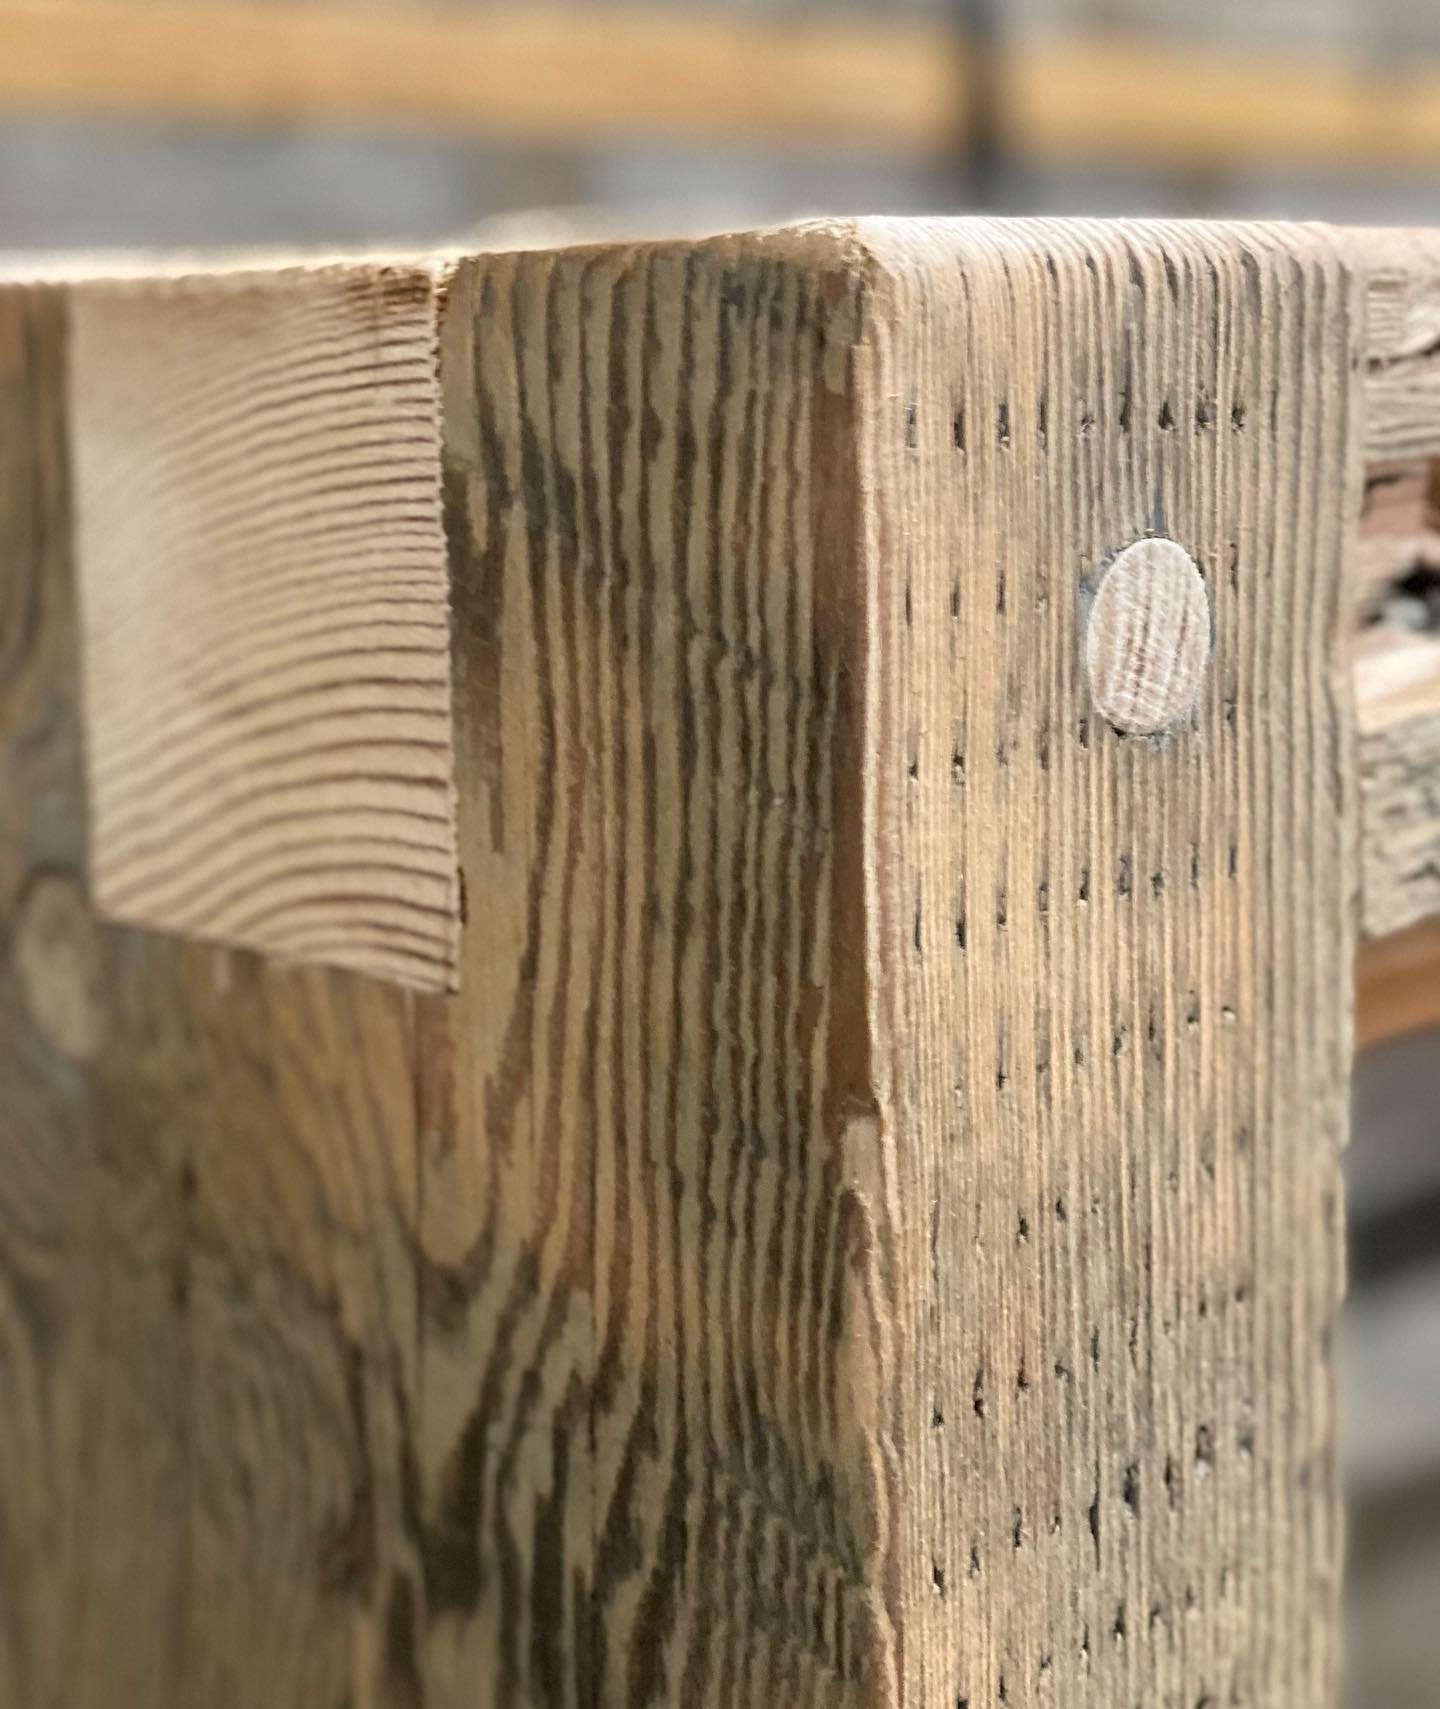 A few progress shots of a chunky recycled Douglas Fir bench seat that we have in production. This one&rsquo;s going to be a ripper. 👍⚒️🌳